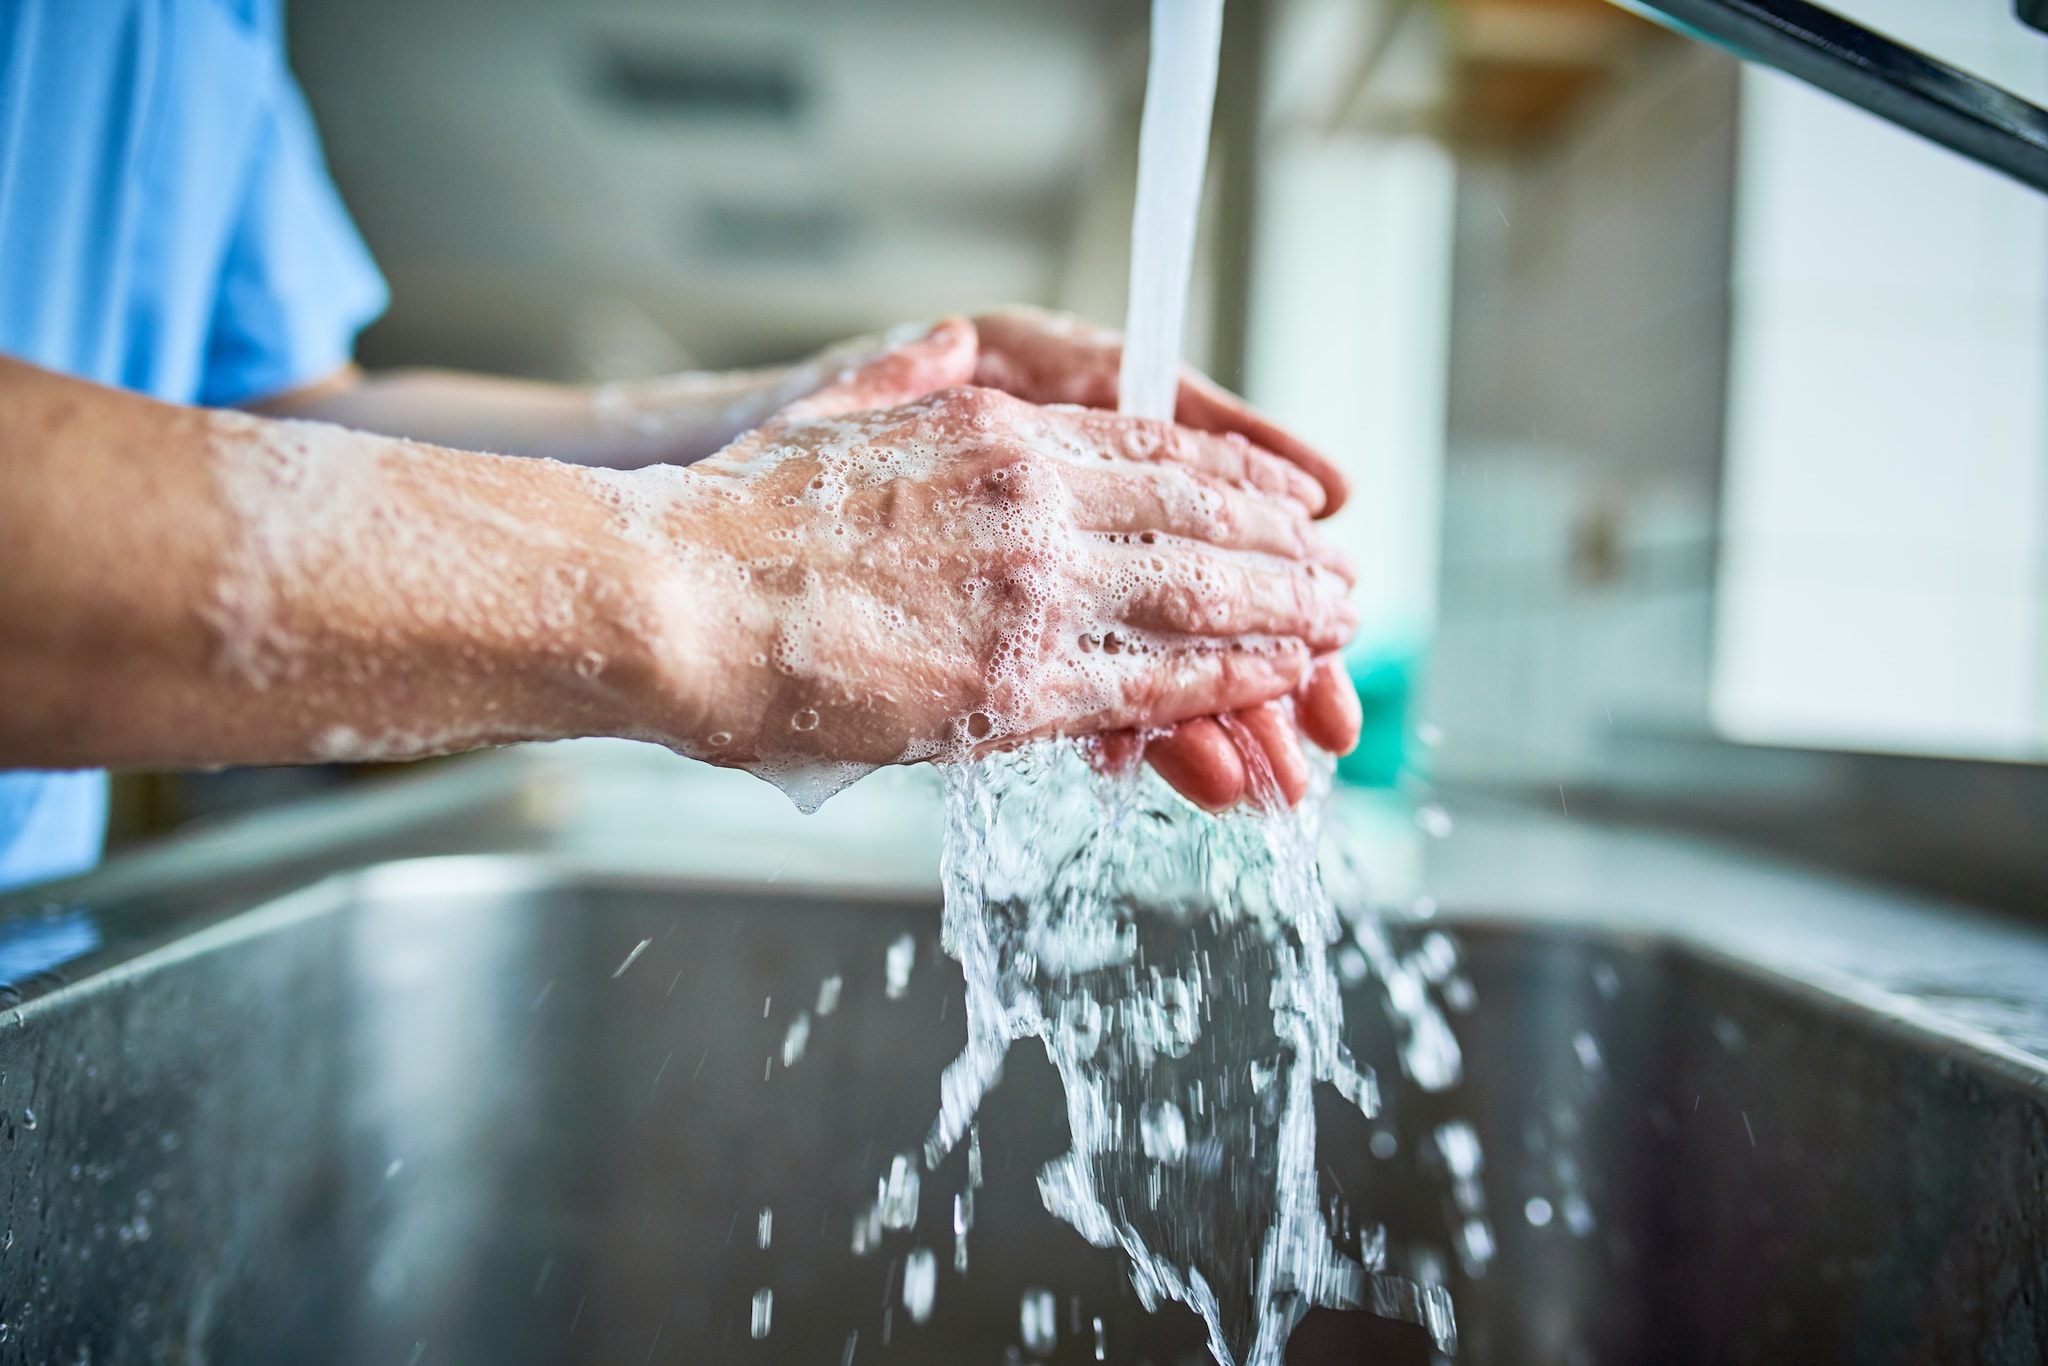 A healthcare provider thoroughly washing hands